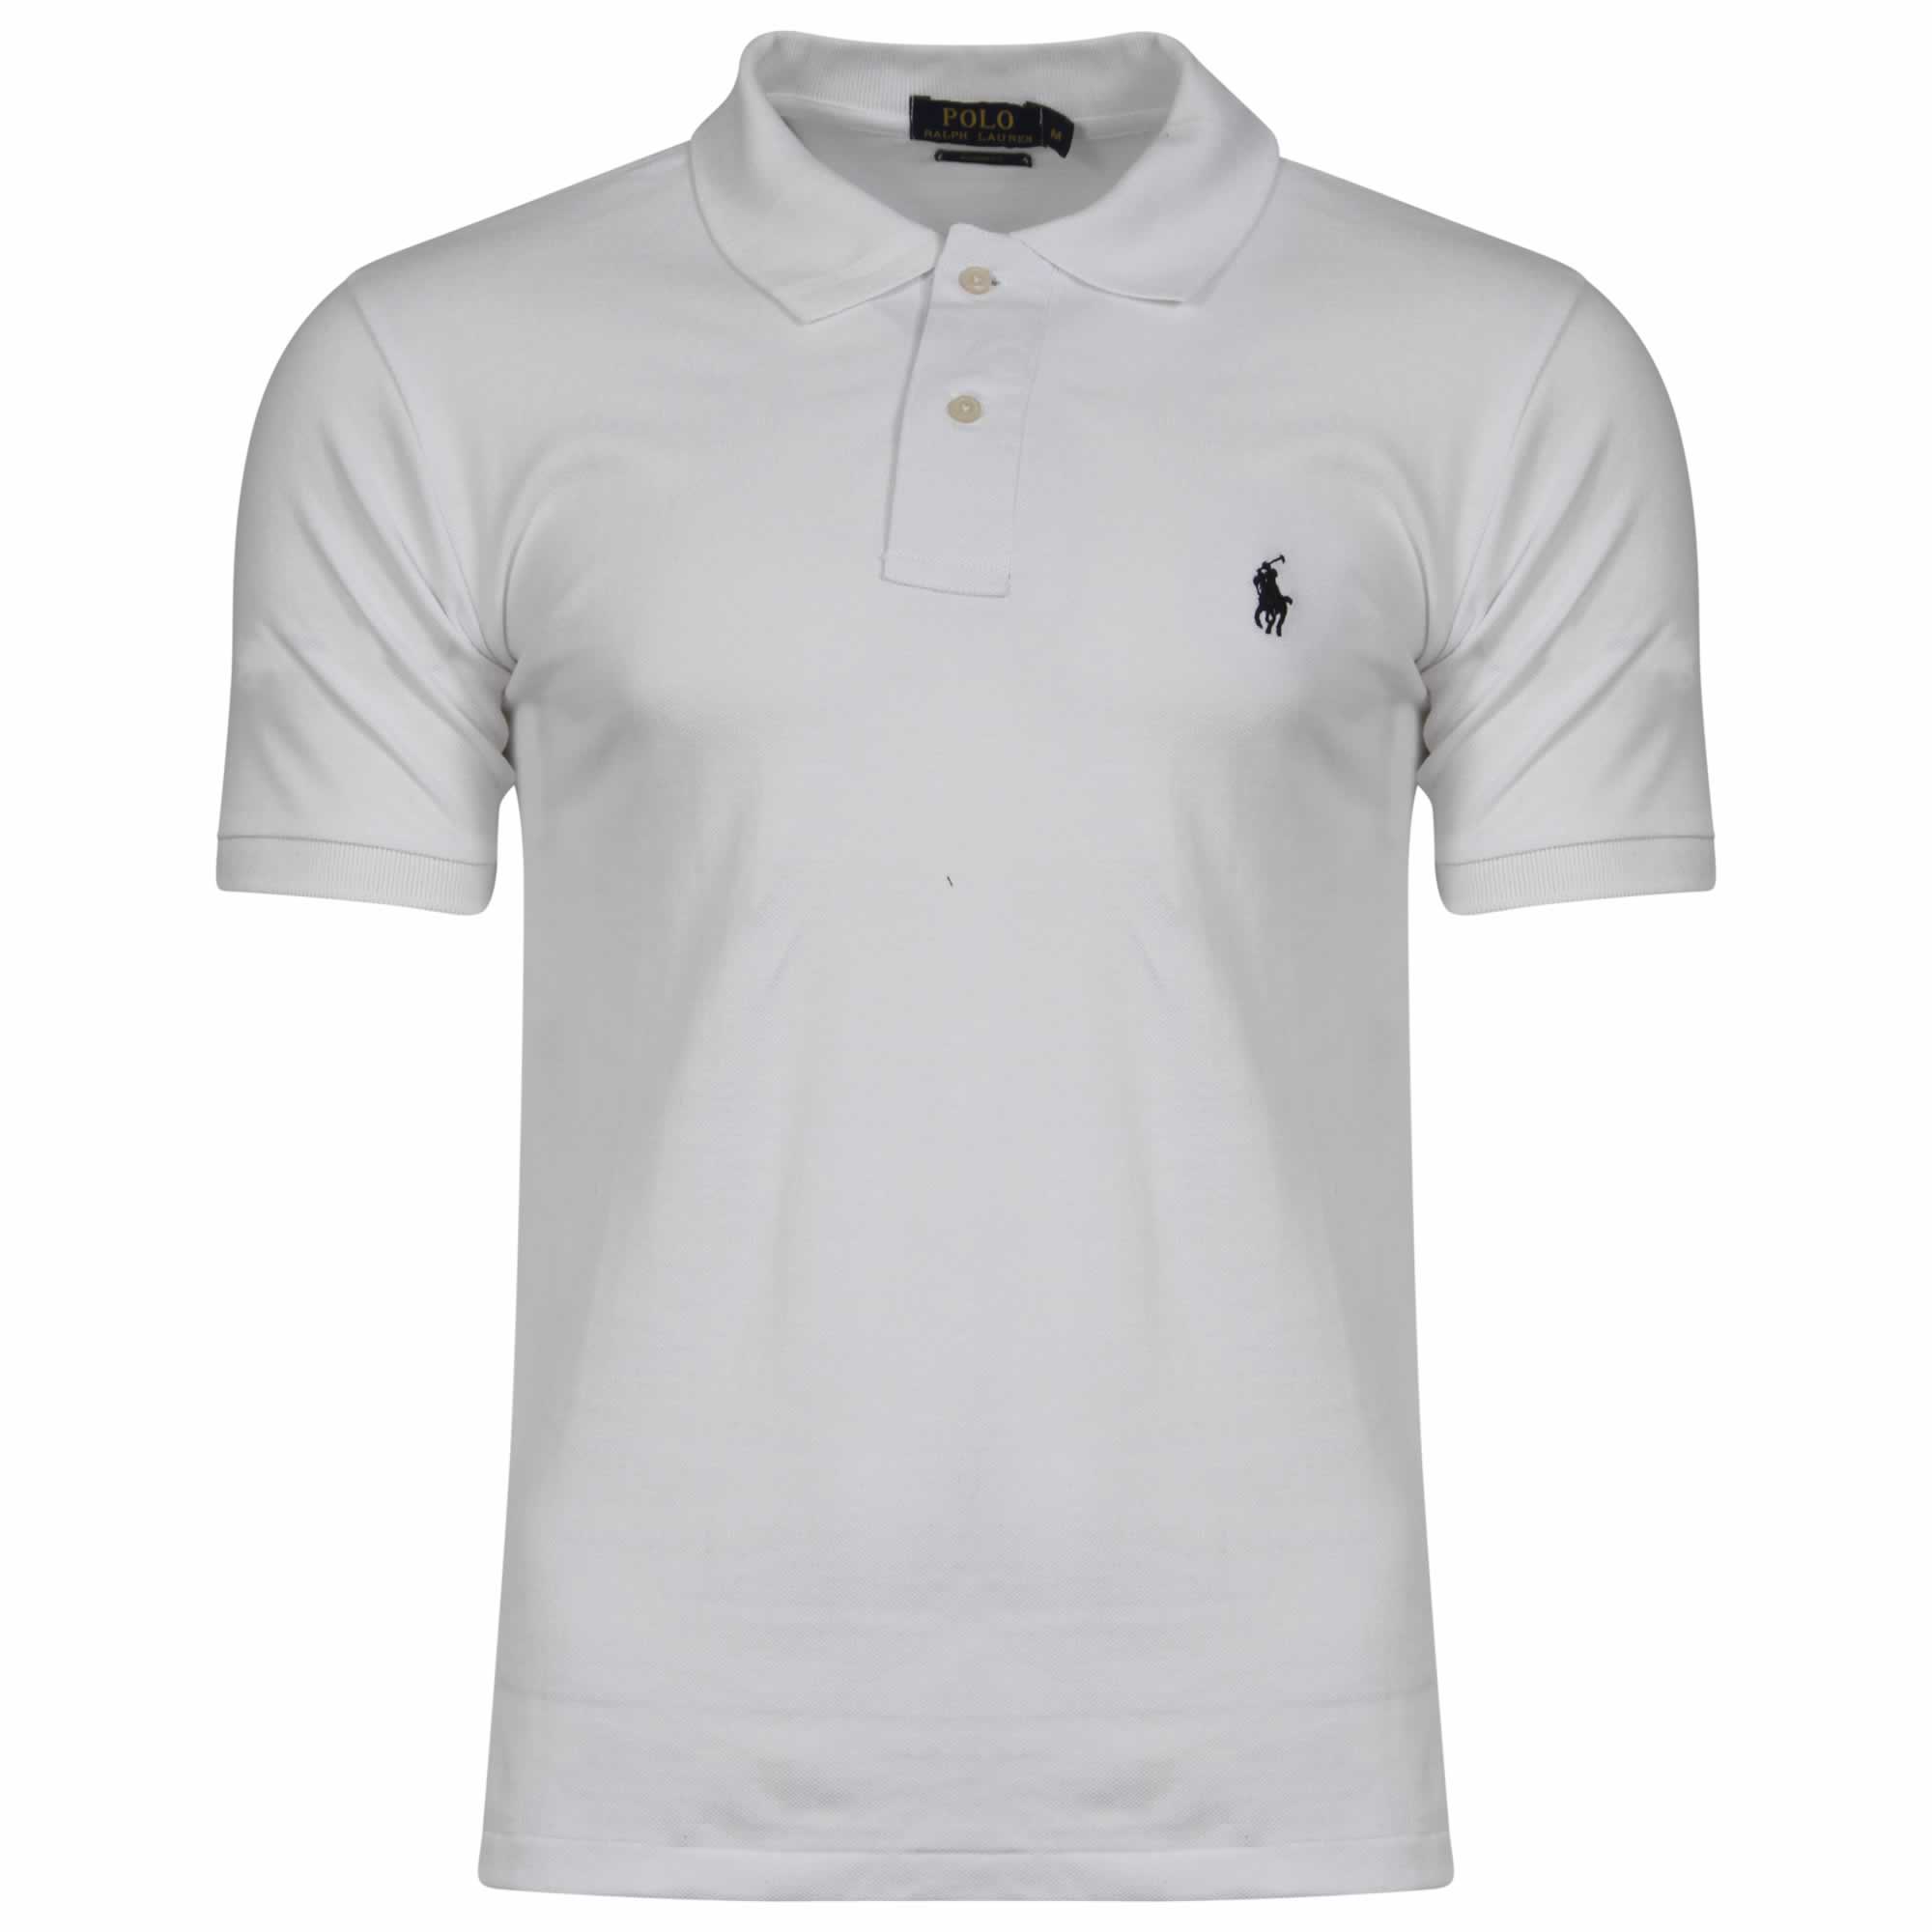 Ralph Lauren Short Sleeve Polo Shirt. Custom Fit in White - INTOTO7 ...